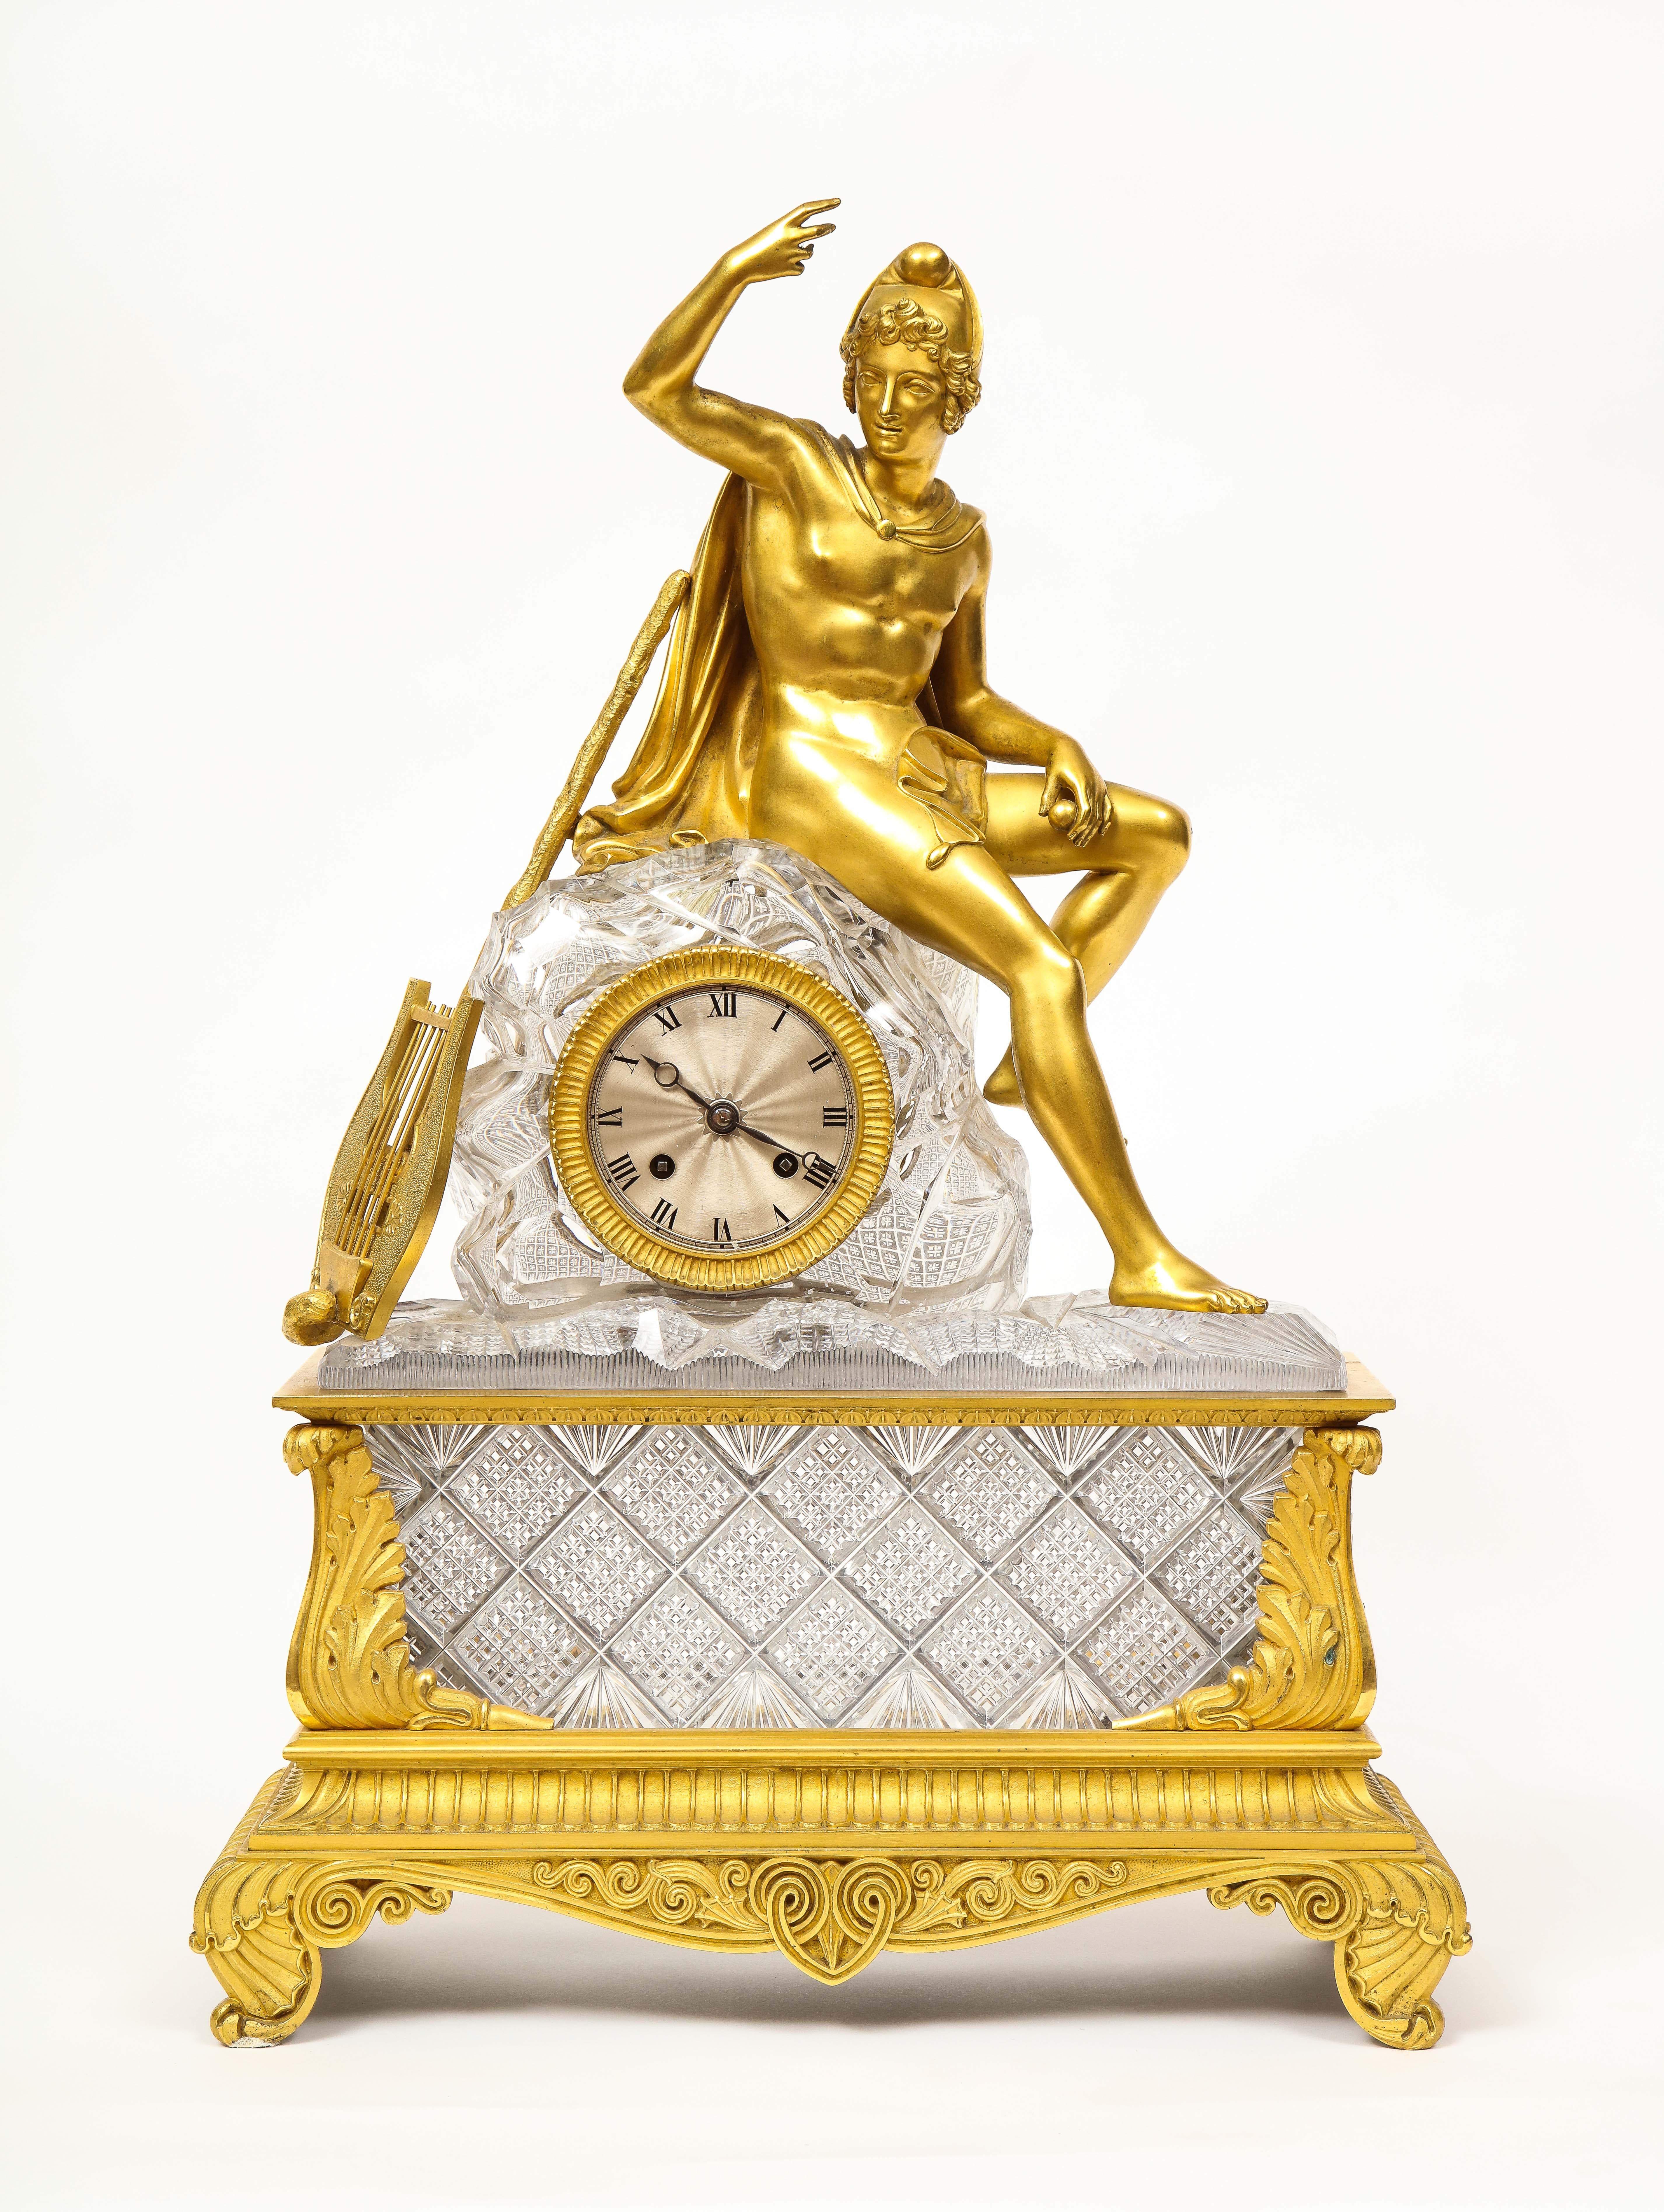 Exquisite French Empire Ormolu and Cut-Crystal Clock, c. 1815 For Sale 16